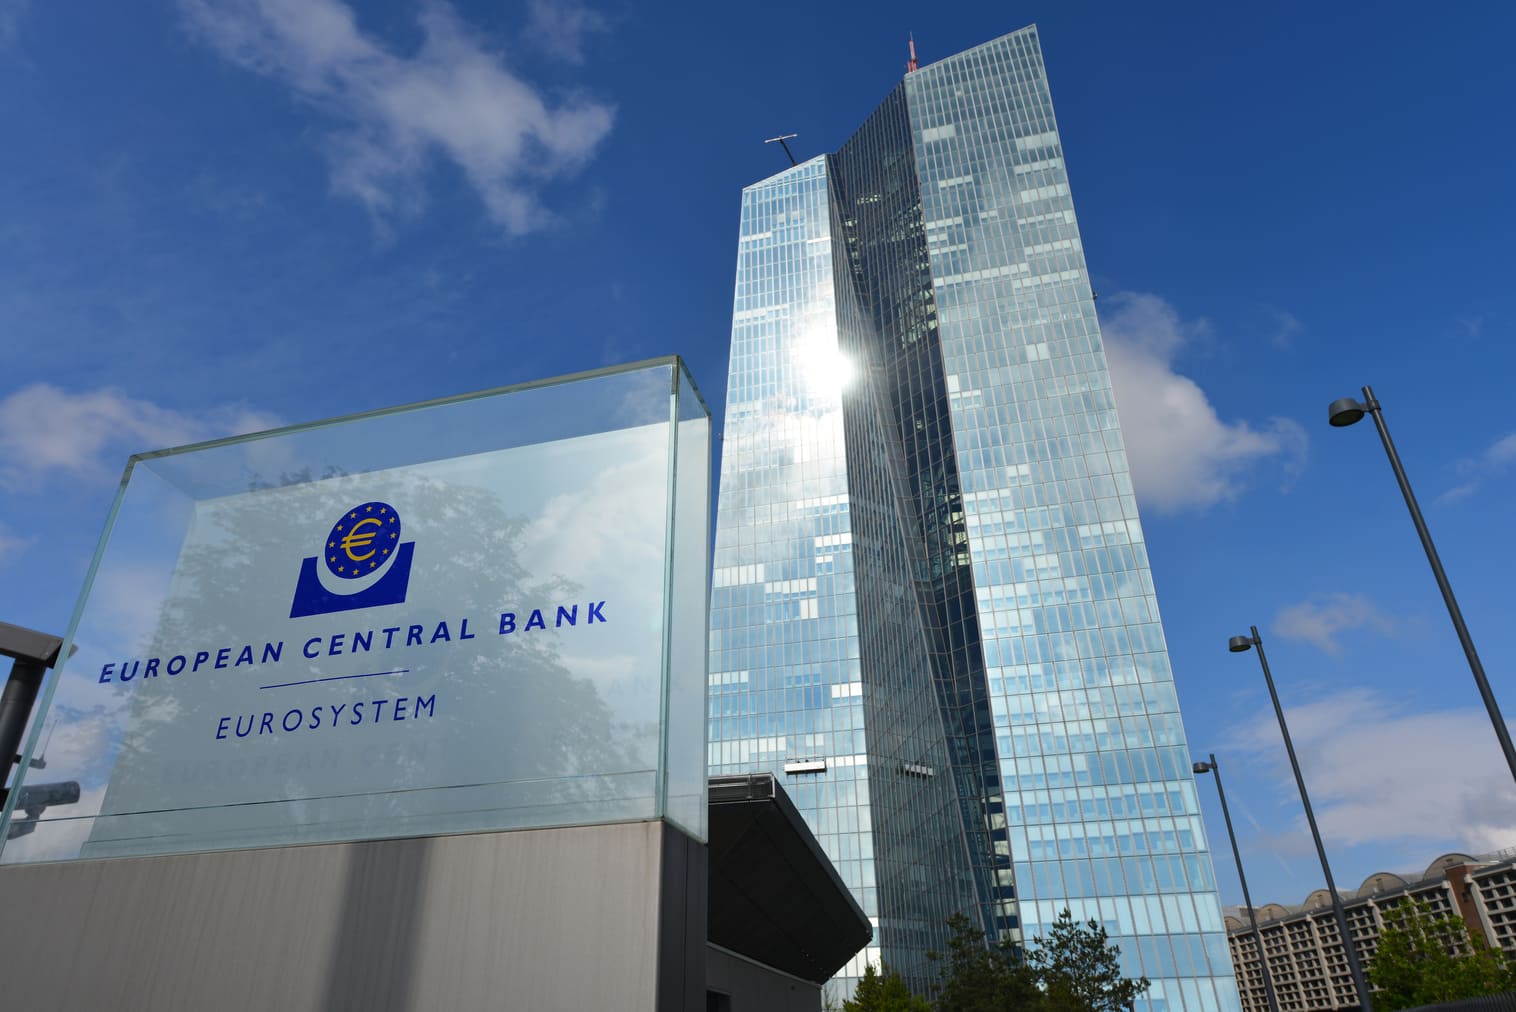 "Financial stability risks from crypto-assets are rising", ECB warns